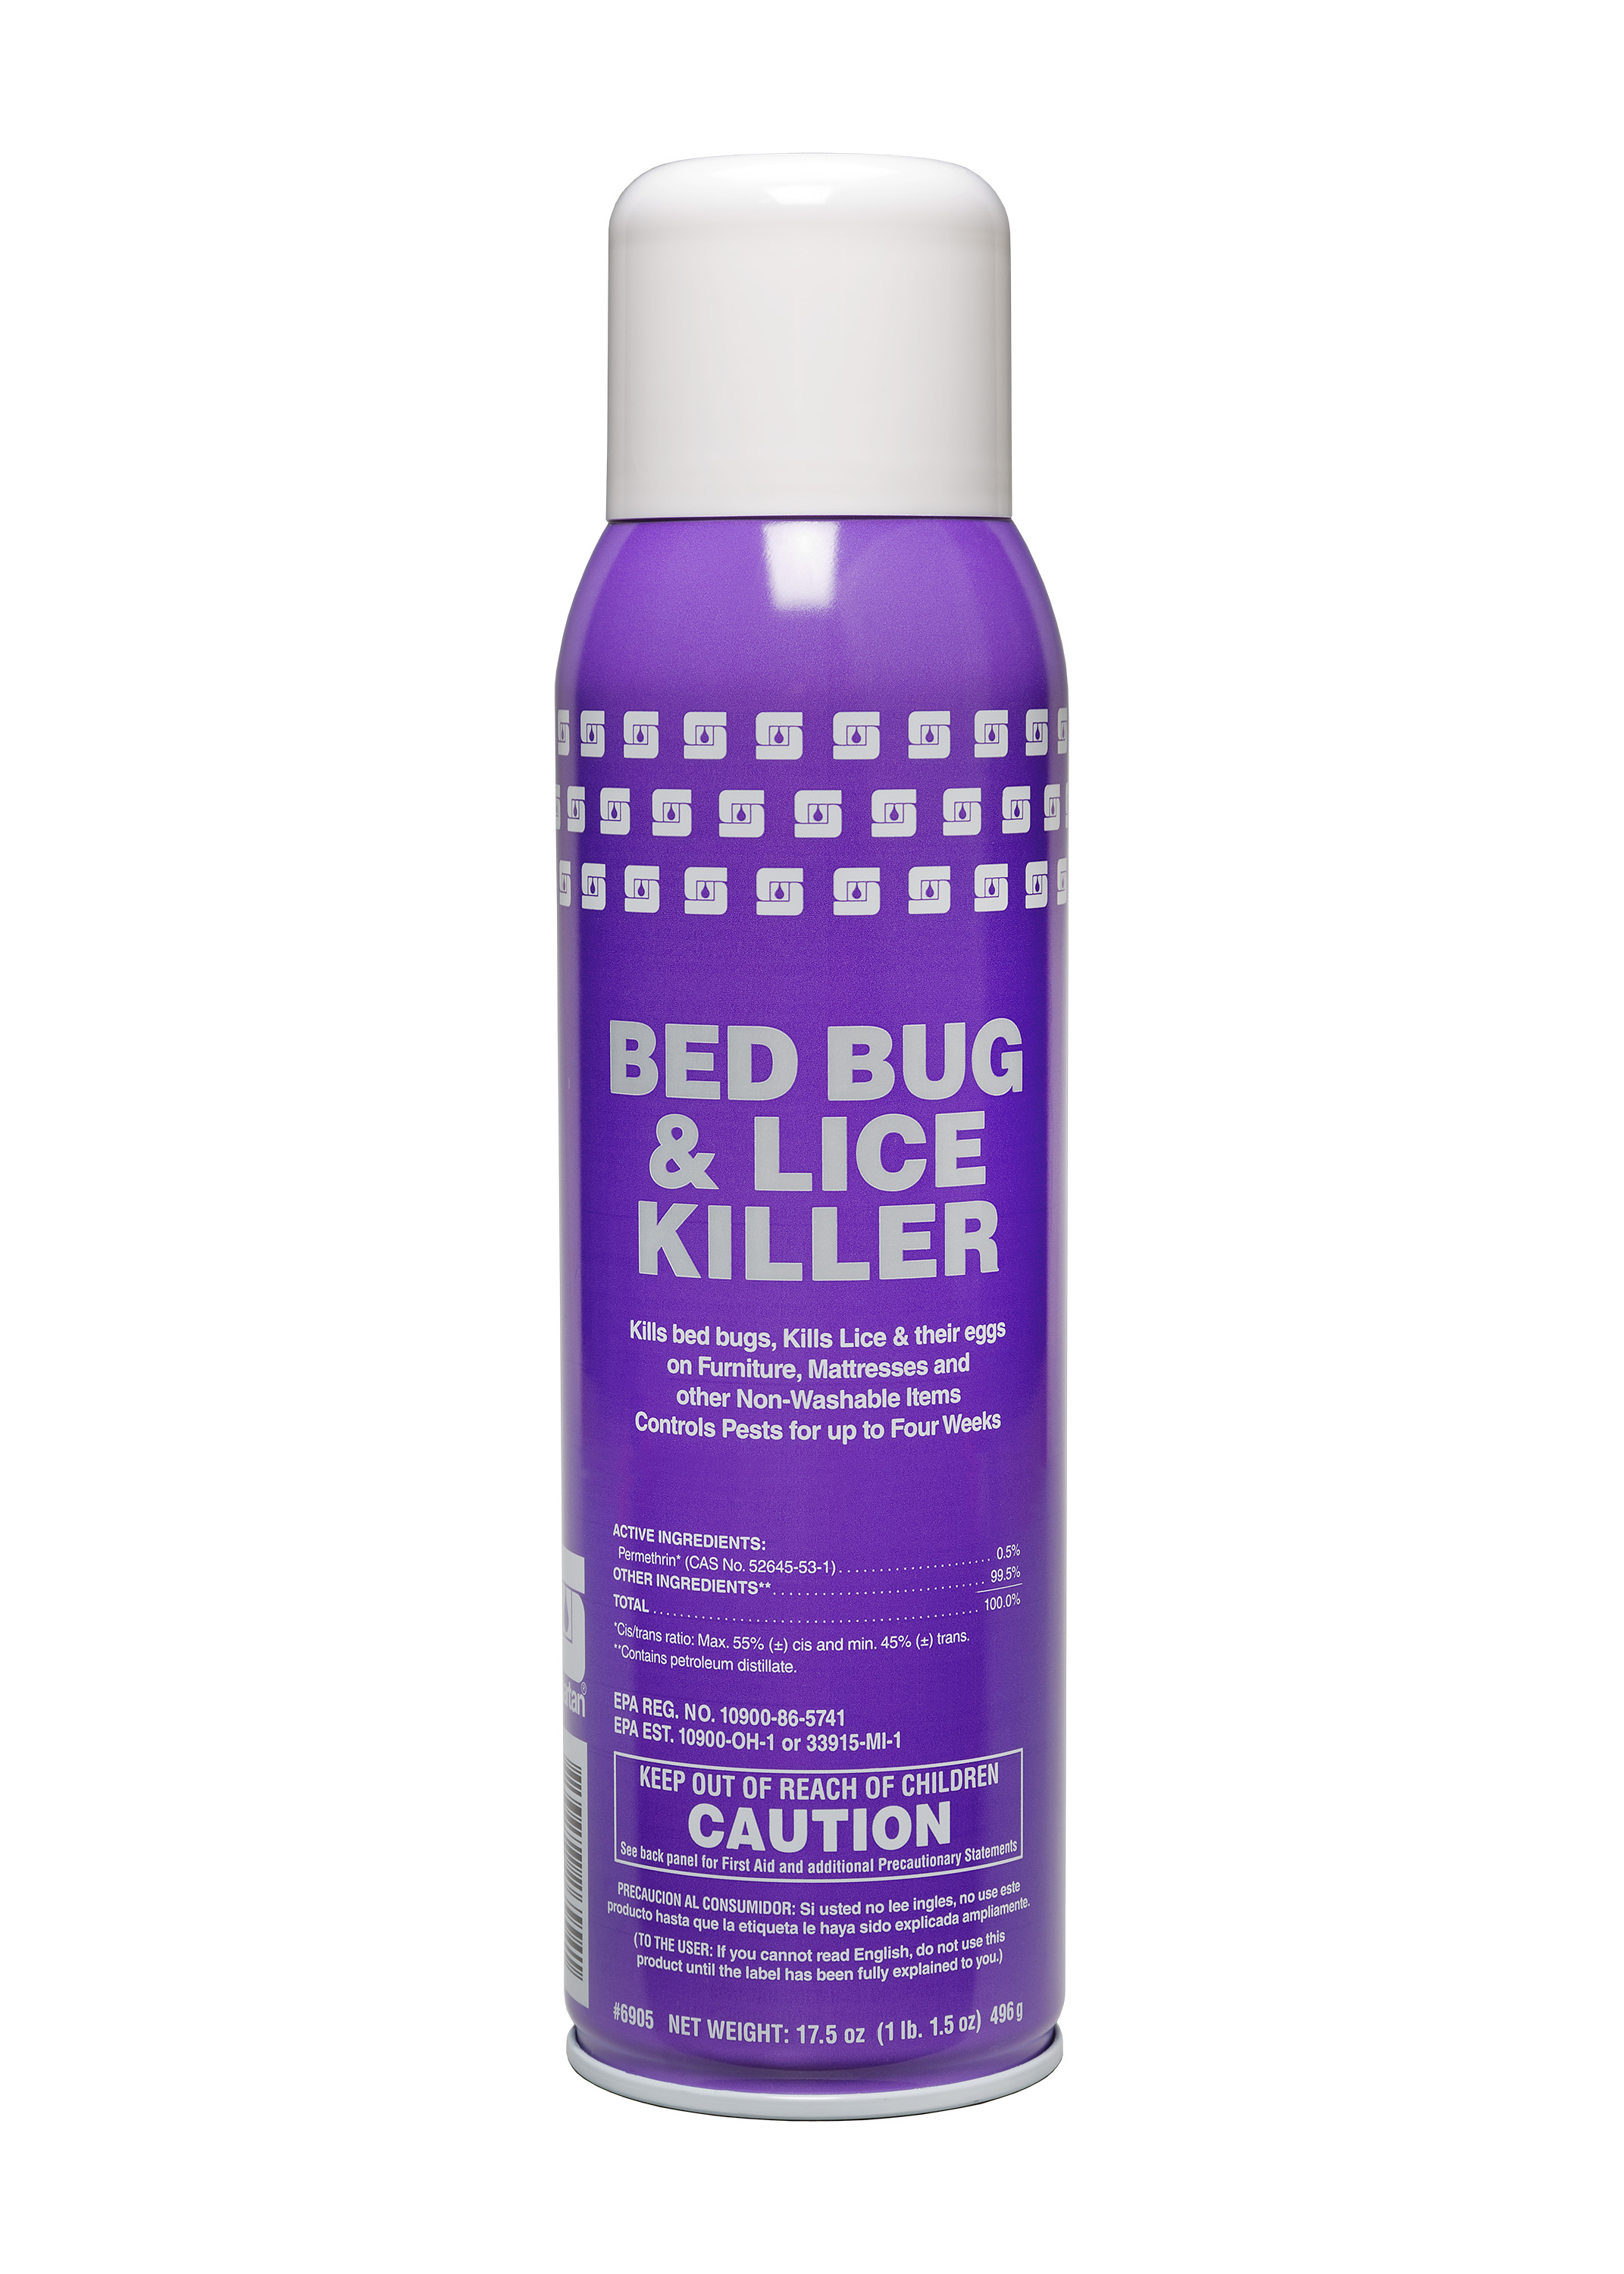 BED BUG AND LICE KILLER PEST CONTROL 17.5 OZ CAN